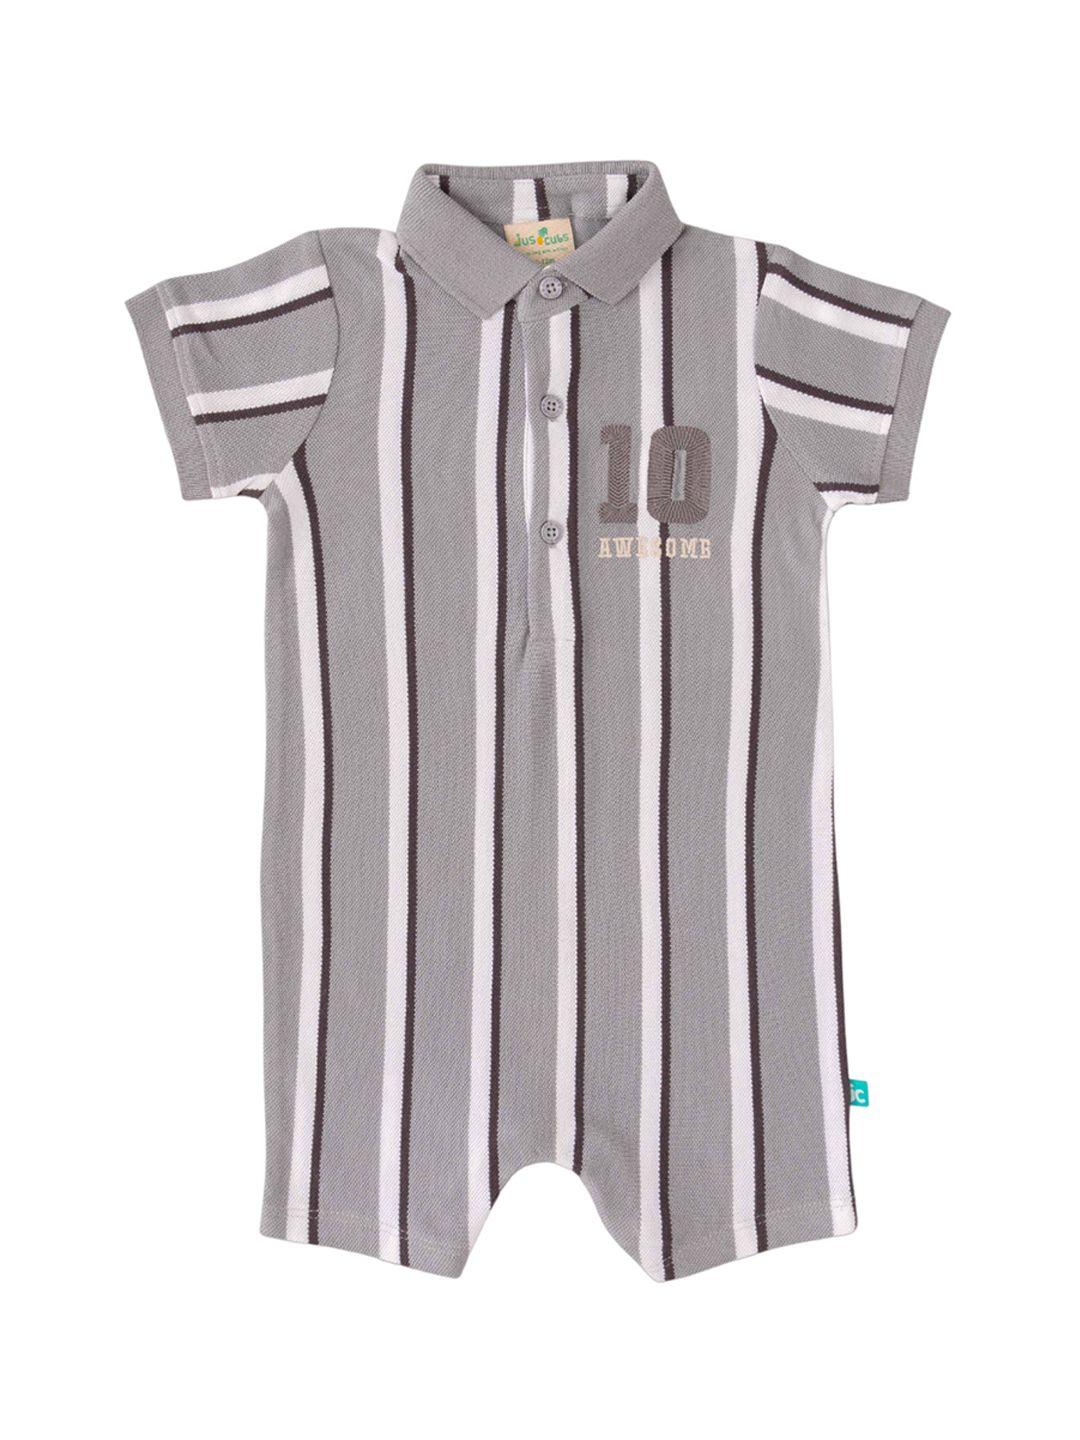 juscubs-infant-boys-striped-cotton-rompers